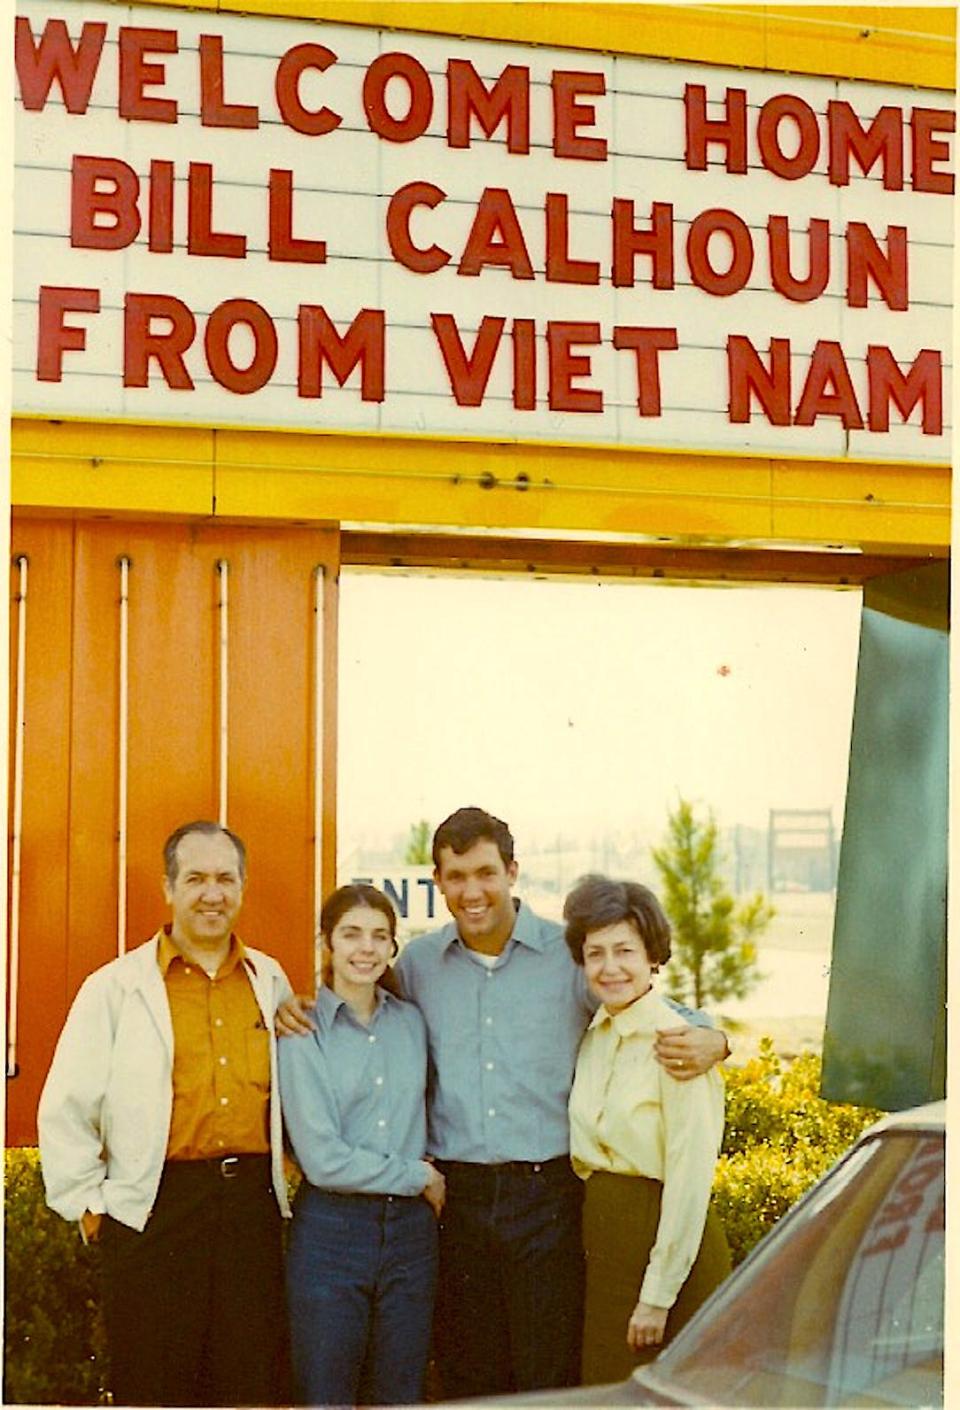 In this 1970 homecoming photo, Navy helicopter pilot Bill Calhoun and Jane, his bride of 14 months, are flanked by Bill’s parents, Judge Marcus and mother, Bernice. (Bill and Jane met in November, married in December, and he went to Vietnam a month later.) Bill died in Newport in 2015. “Thank heaven his community welcomed him home warmly.  I wish it had been so for all our Veterans,” wrote his widow Jane, a long time Portsmouth resident.